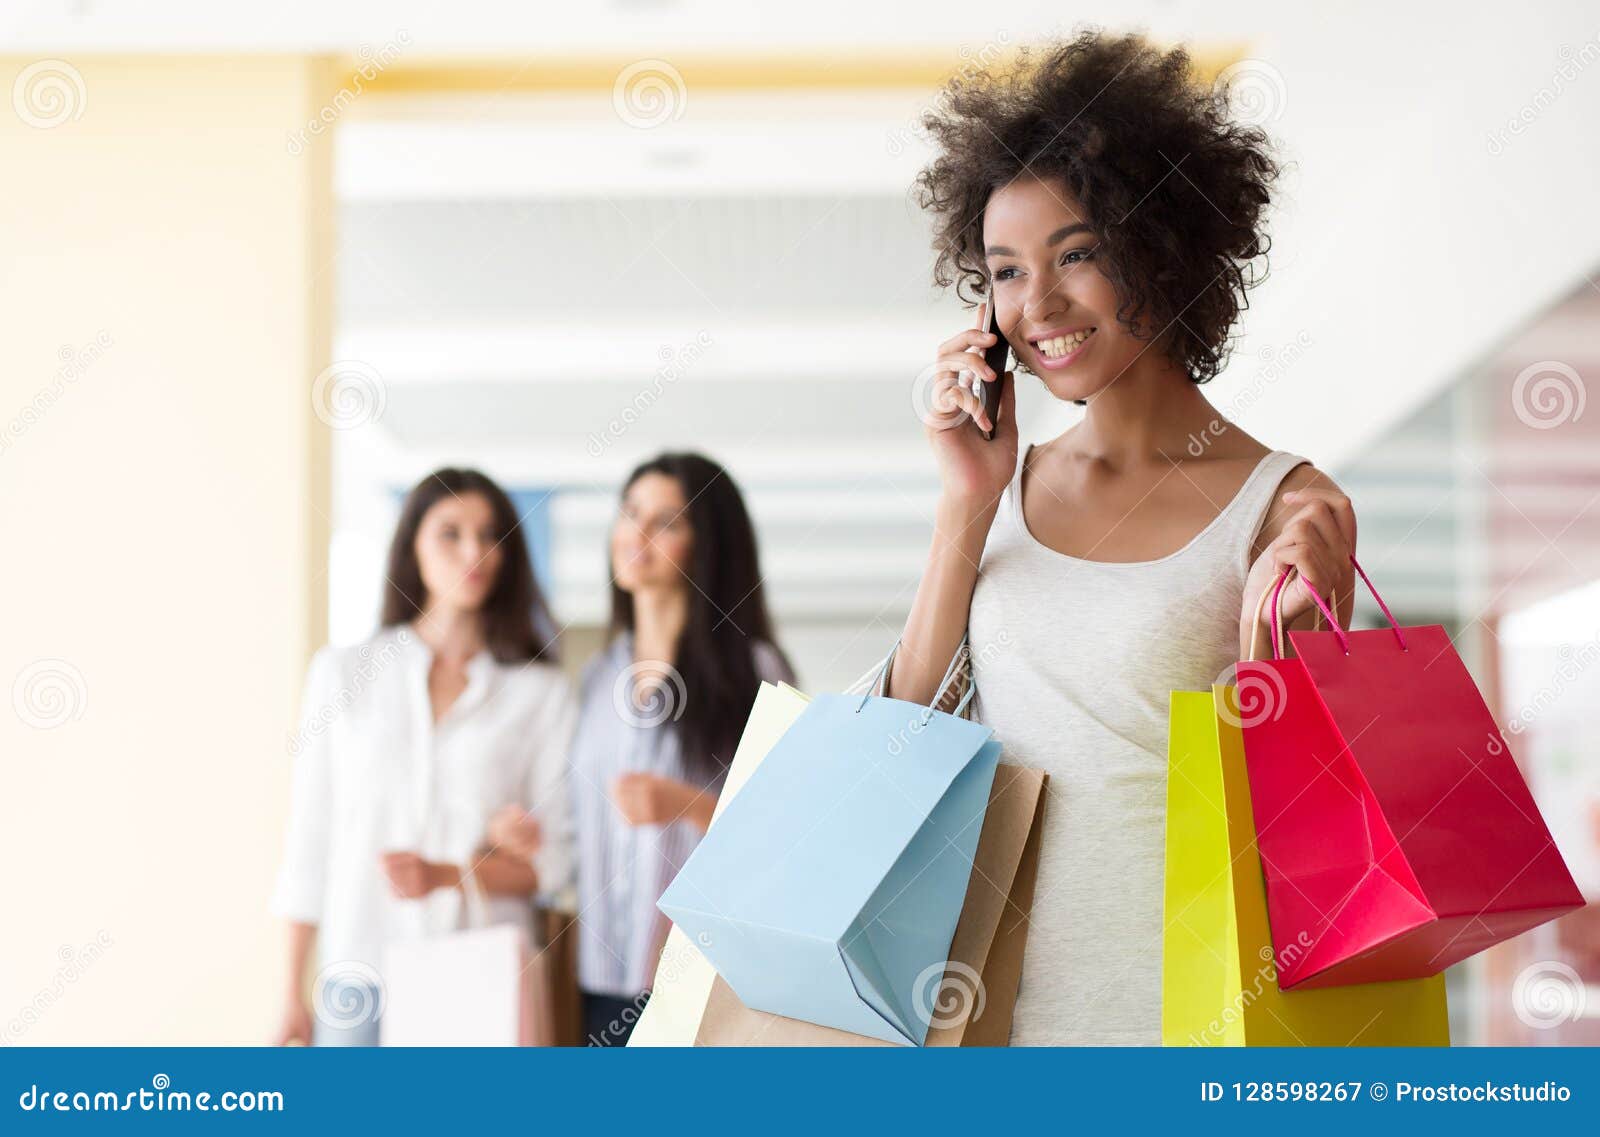 Happy Woman Talking on Mobile Phone while Shopping Stock Image - Image ...